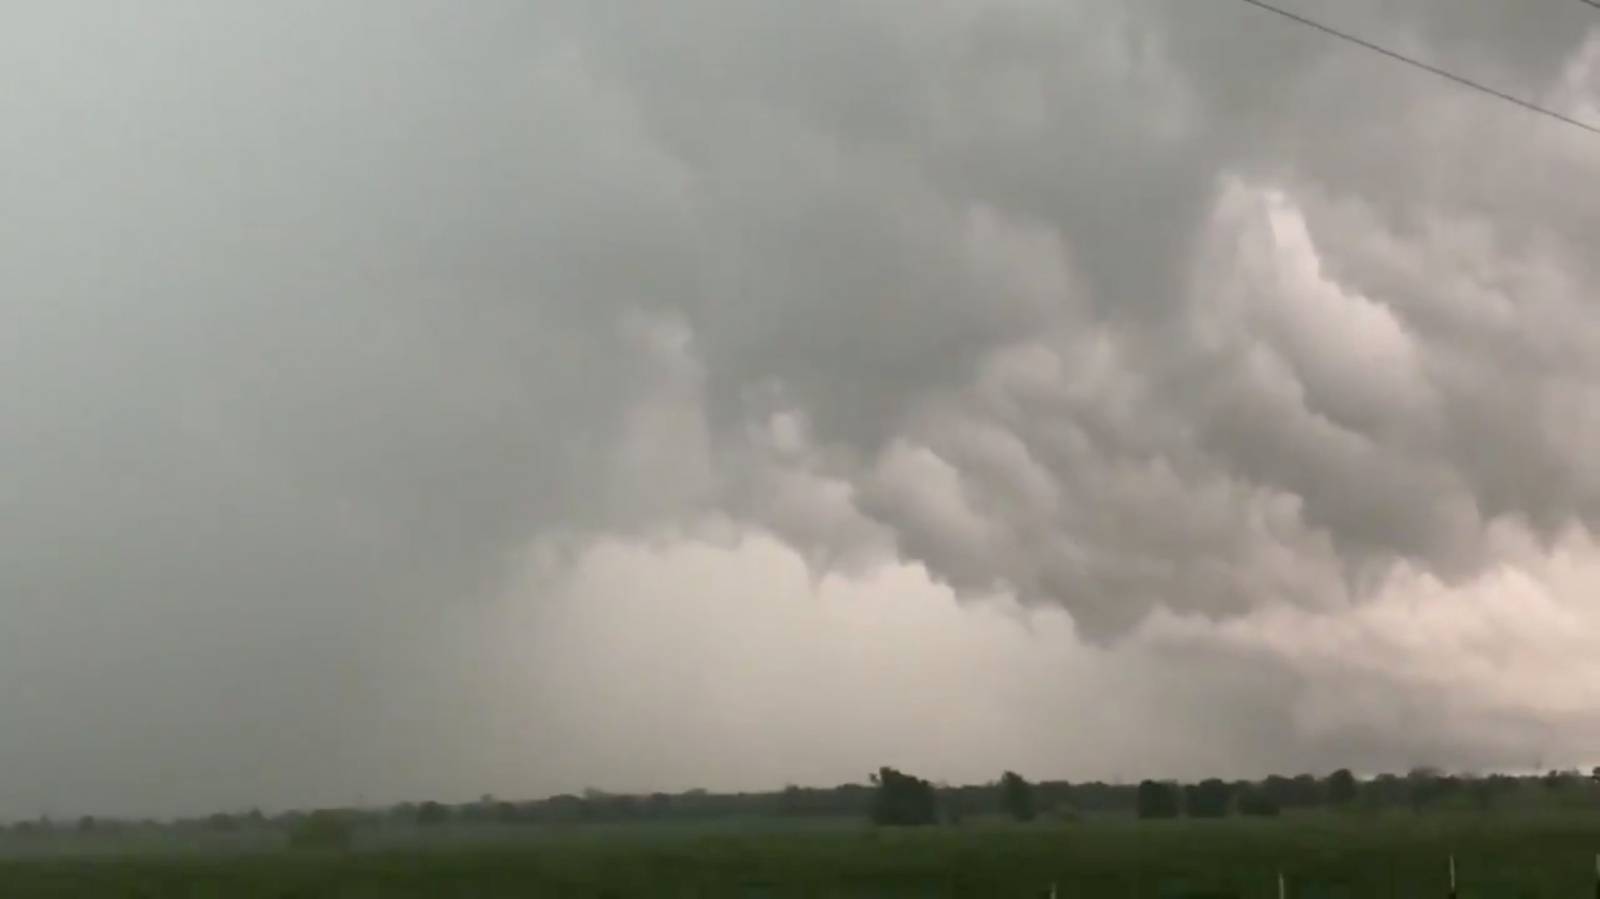 A view of clouds, part of a weather system seen from near Franklin, Texas, U.S., in this still image from social media video